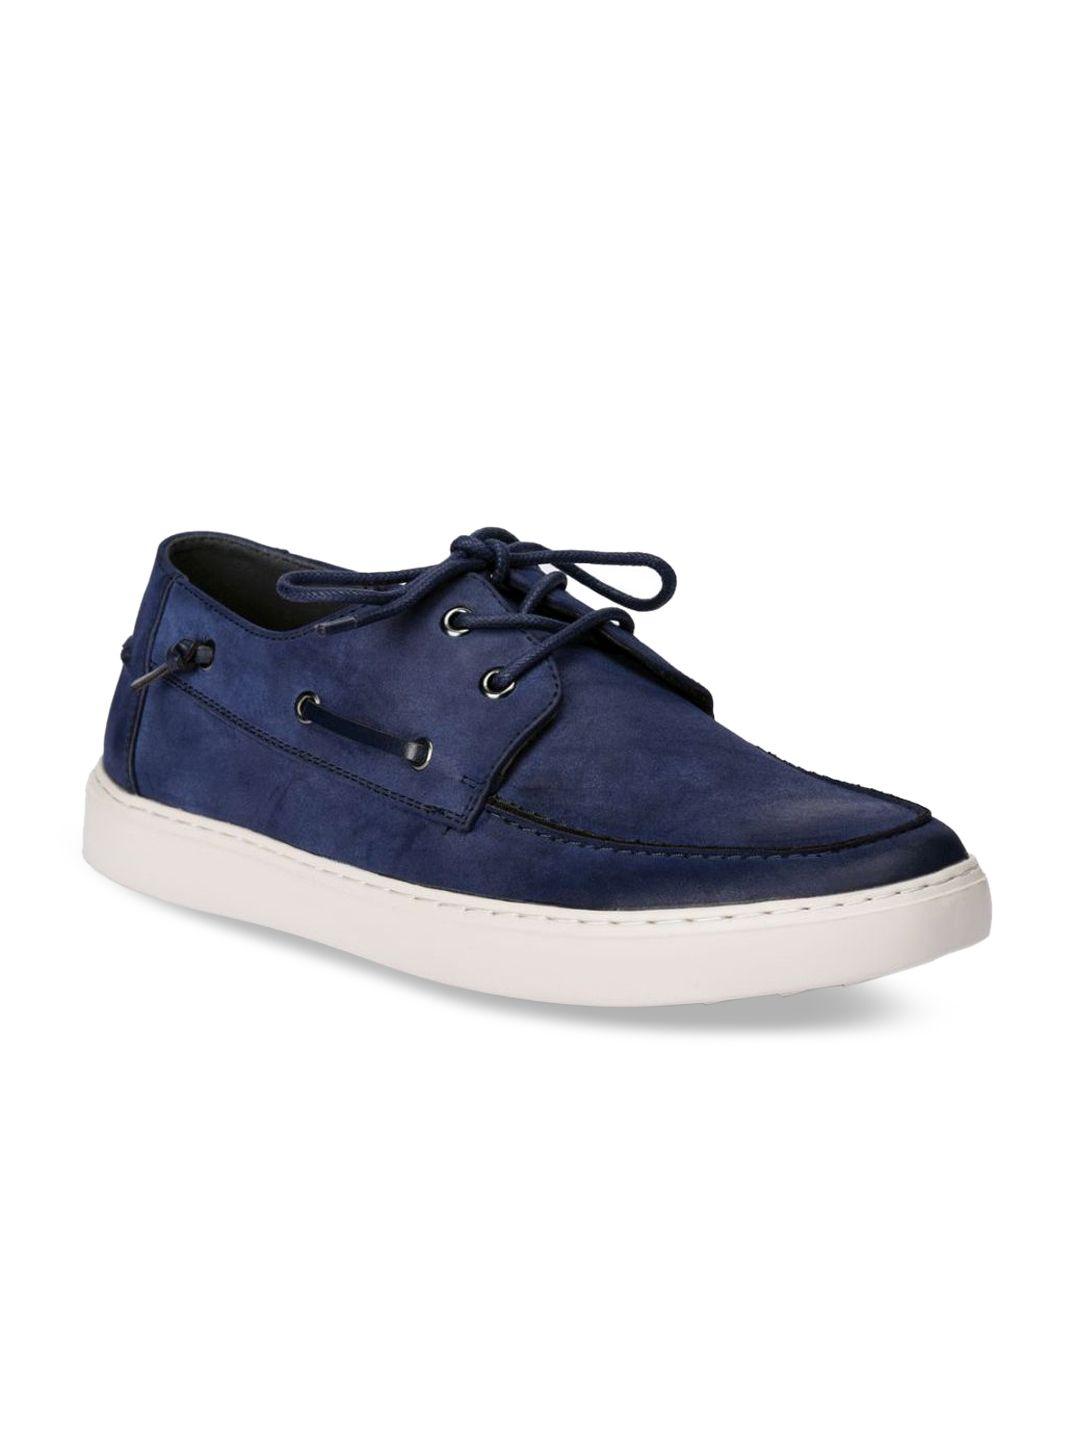 kenneth-cole-men-navy-blue-lightweight-classic-leather-boat-sneakers